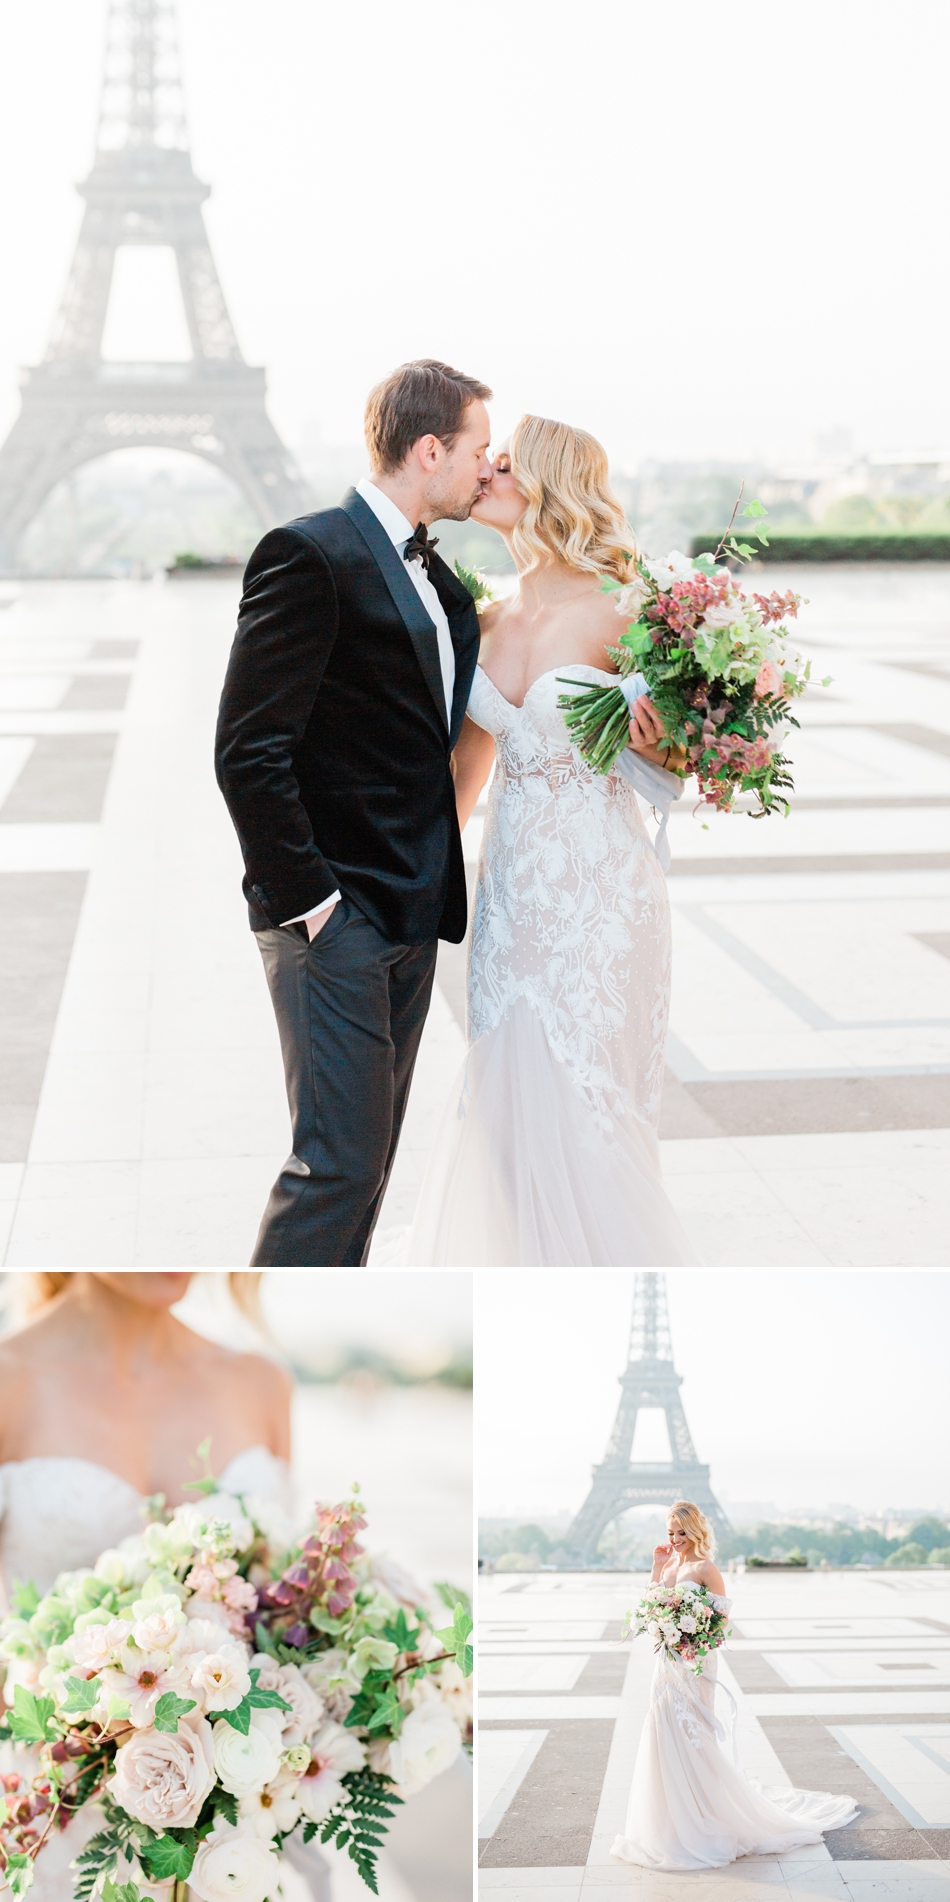 Photoshoot of bride and groom in front of the Eiffel Tower